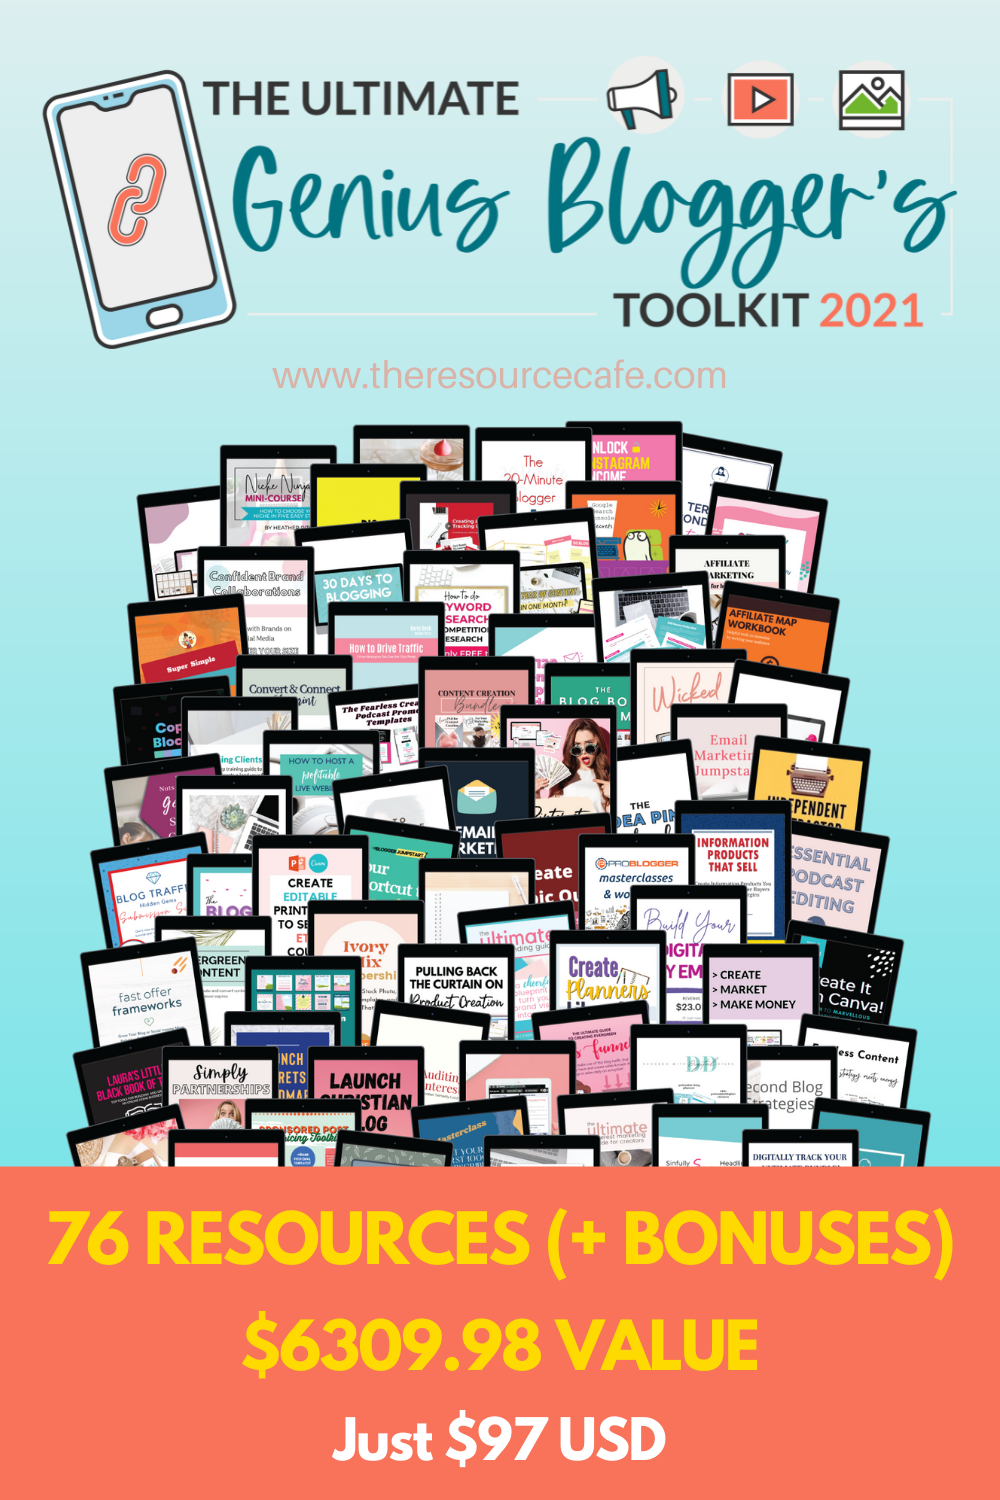 The Genius Blogger's Toolkit 2021 by Ultimate Bundles